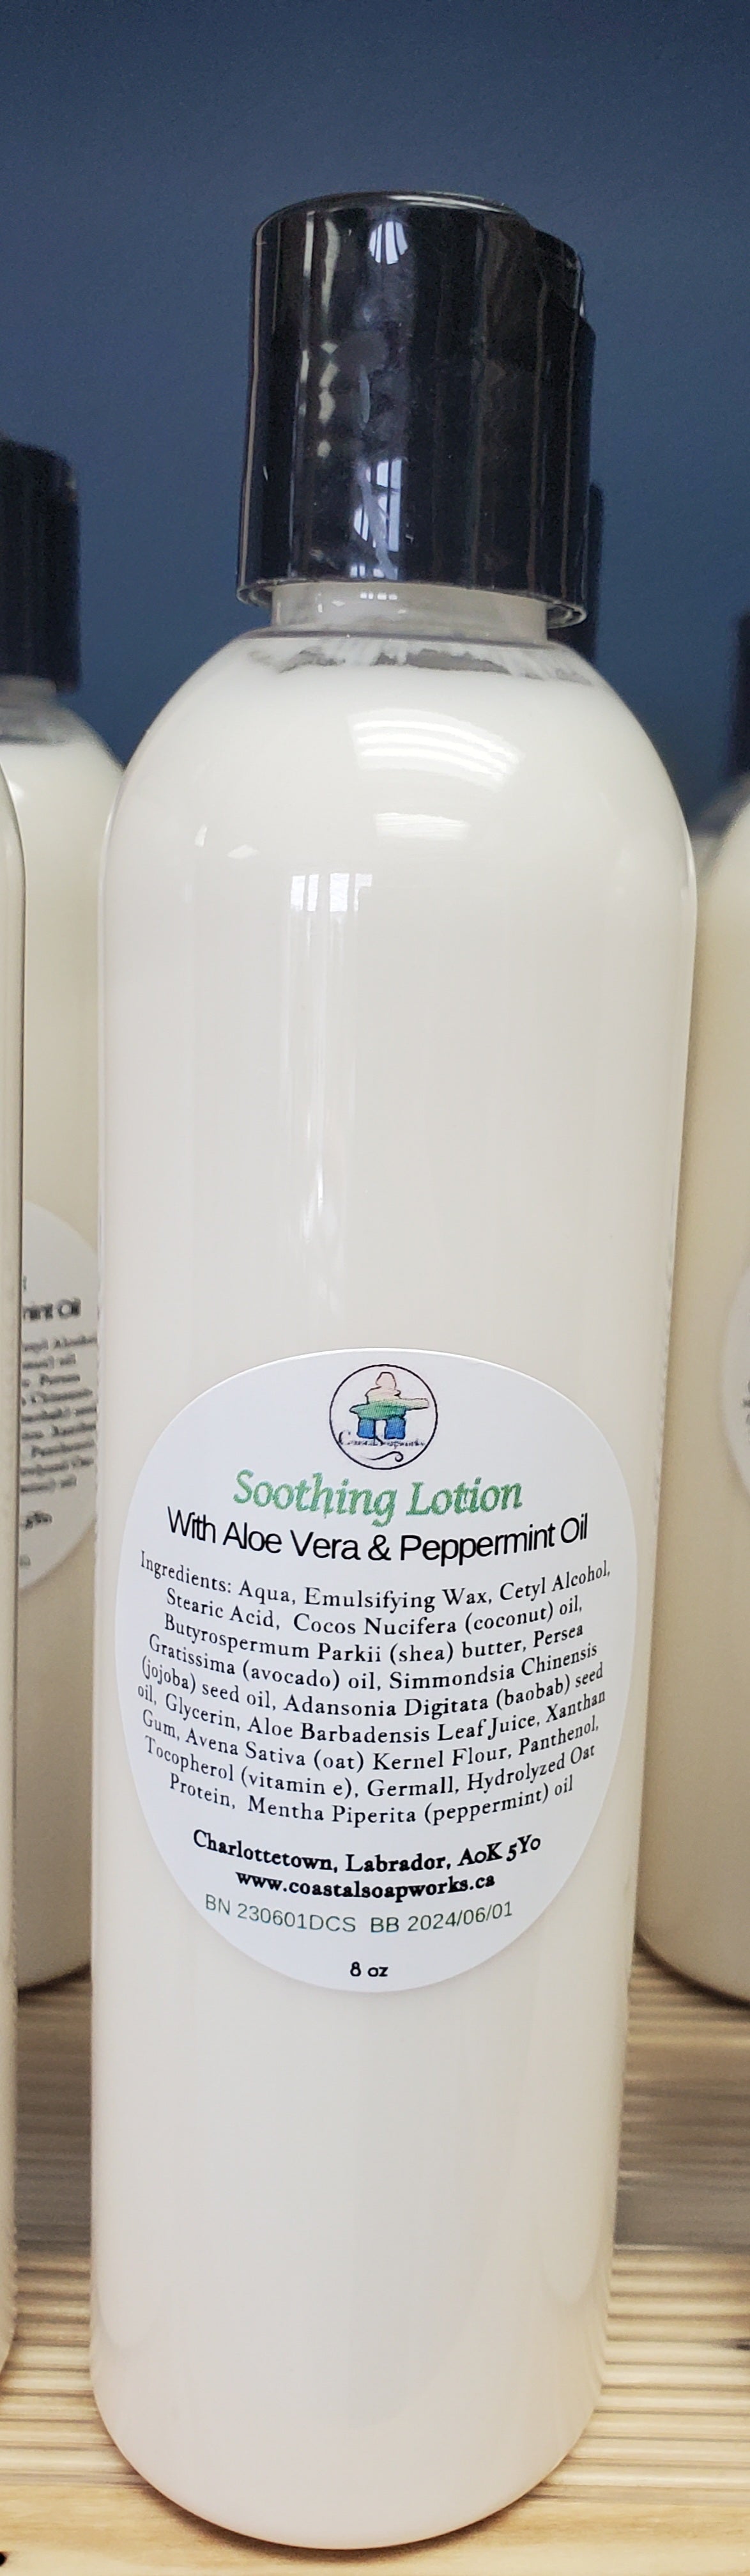 Soothing Lotion 8 oz